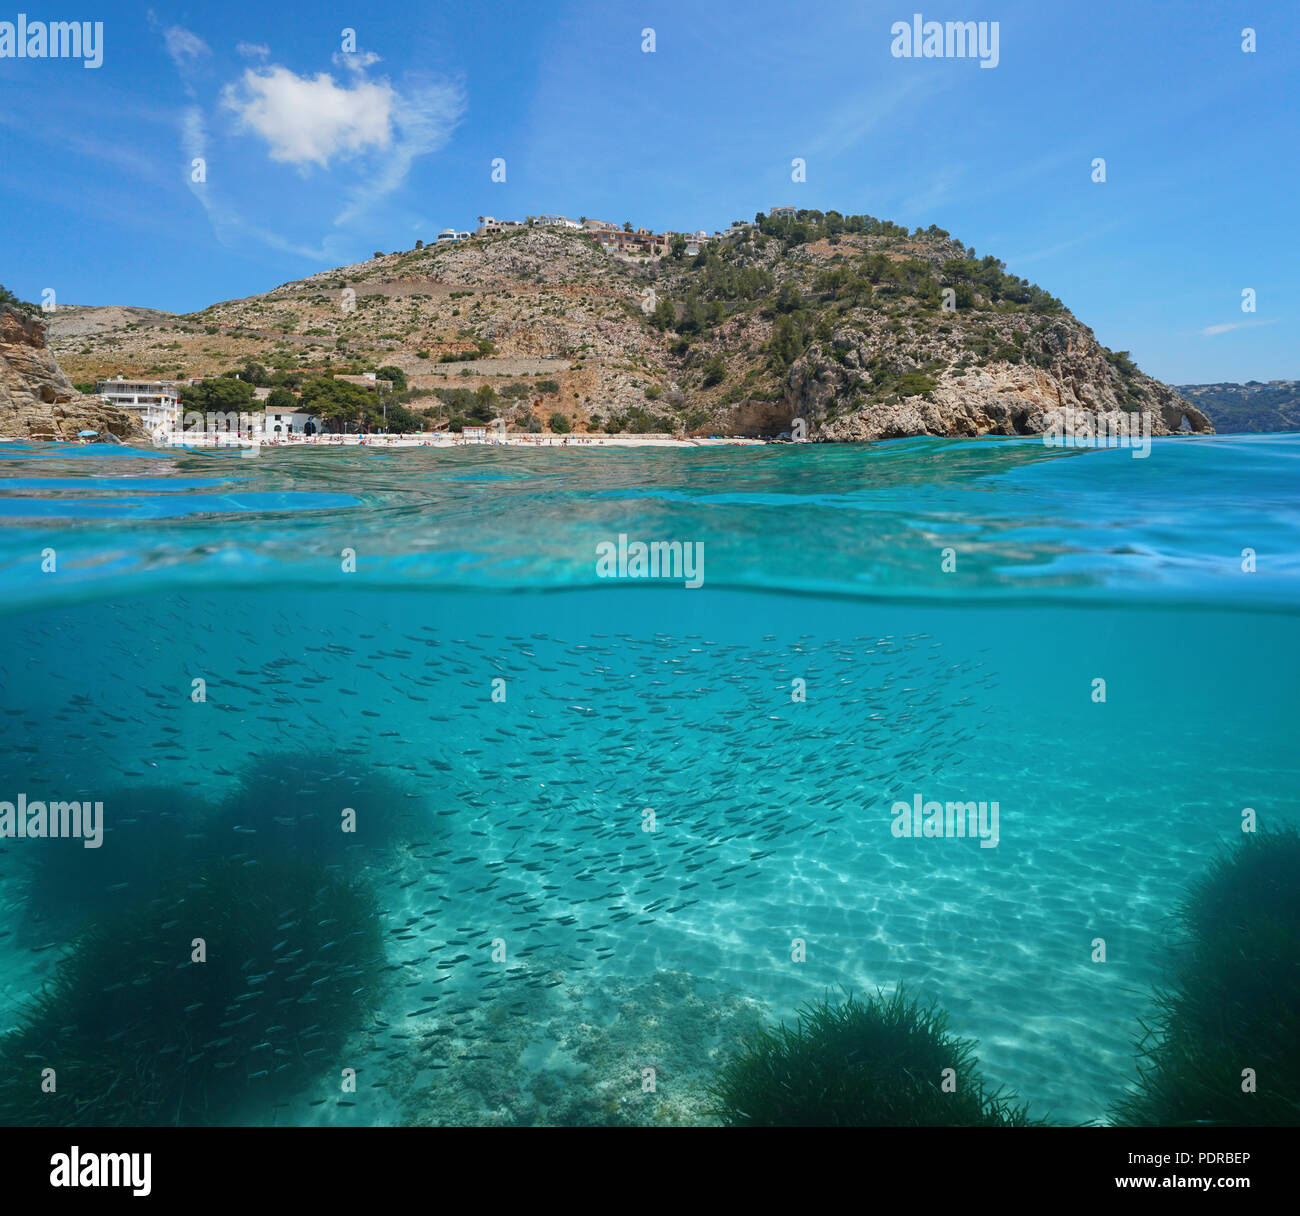 Beach and rocky coast with a school of Atherina fish underwater, split view above and below surface, Mediterranean sea, Cala Granadella, Javea, Spain Stock Photo